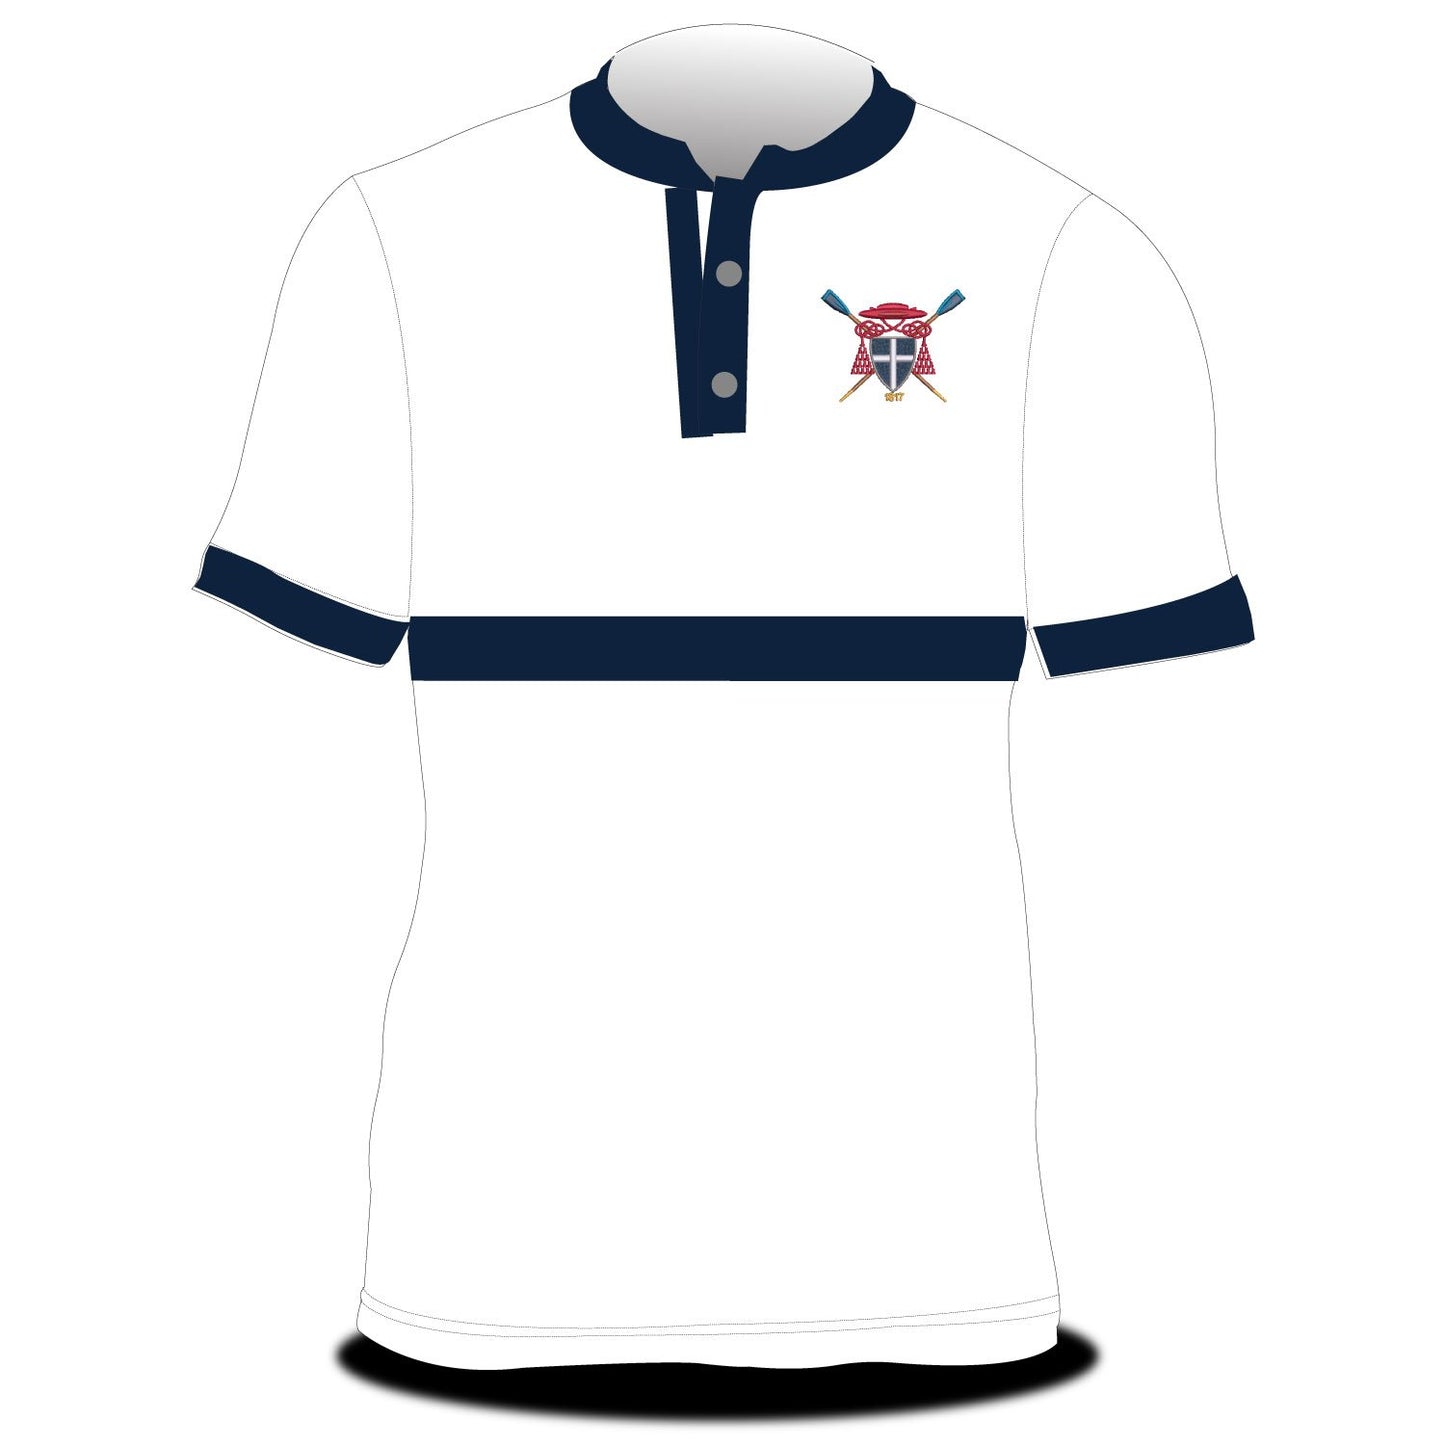 Christ Church College Boat Club Zephyr White with Navy Hoop and Trim